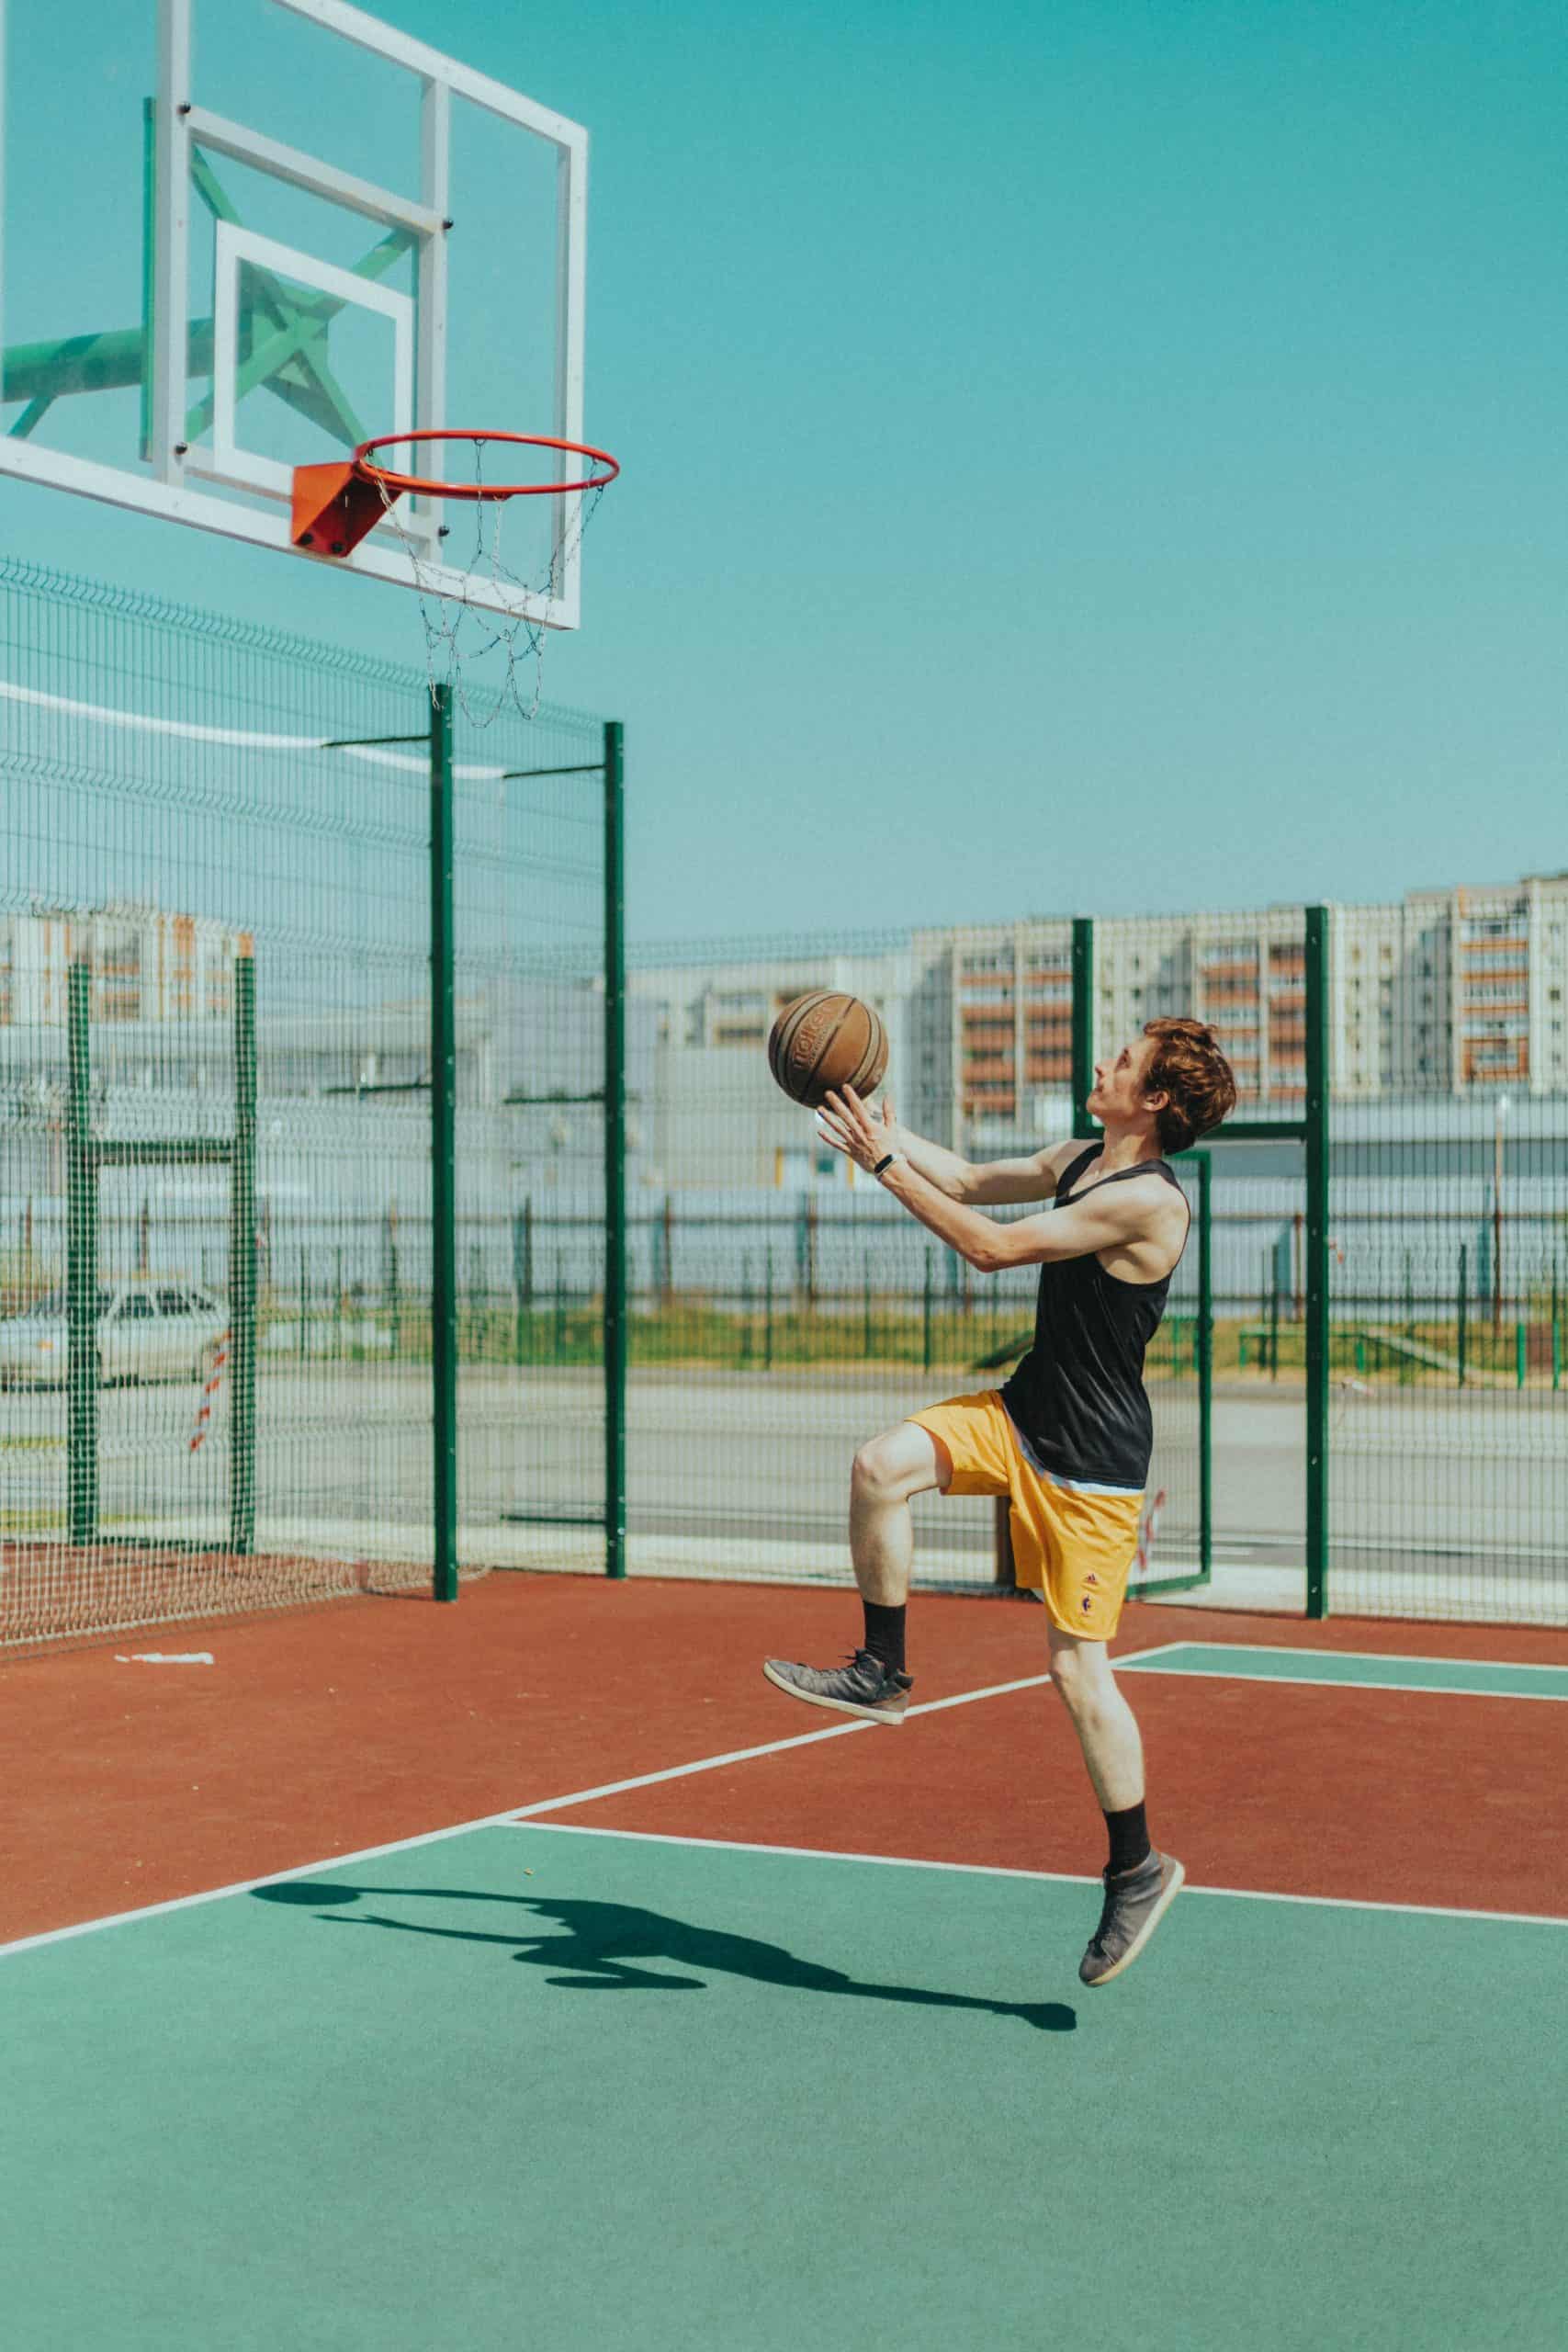 A man playing basketball which is a benefit of physical fitness for personal development